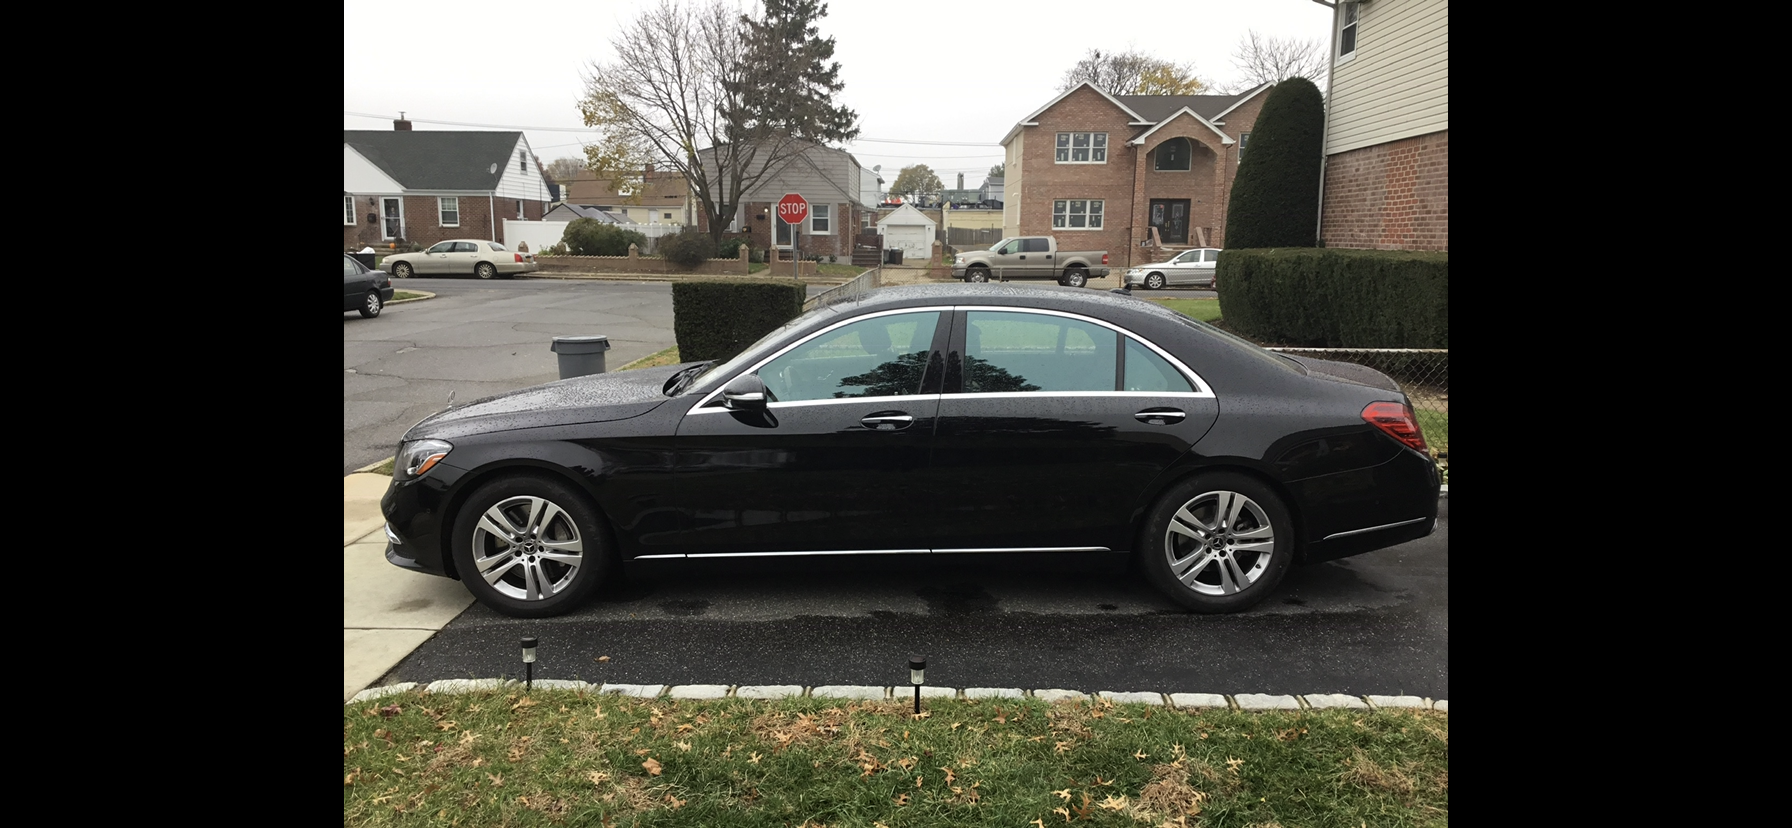 MERCEDES S550
Sedan /
Jersey City, NJ

 / Hourly $0.00
 / Hourly (Other services) $85.00
 / Airport Transfer $175.00
